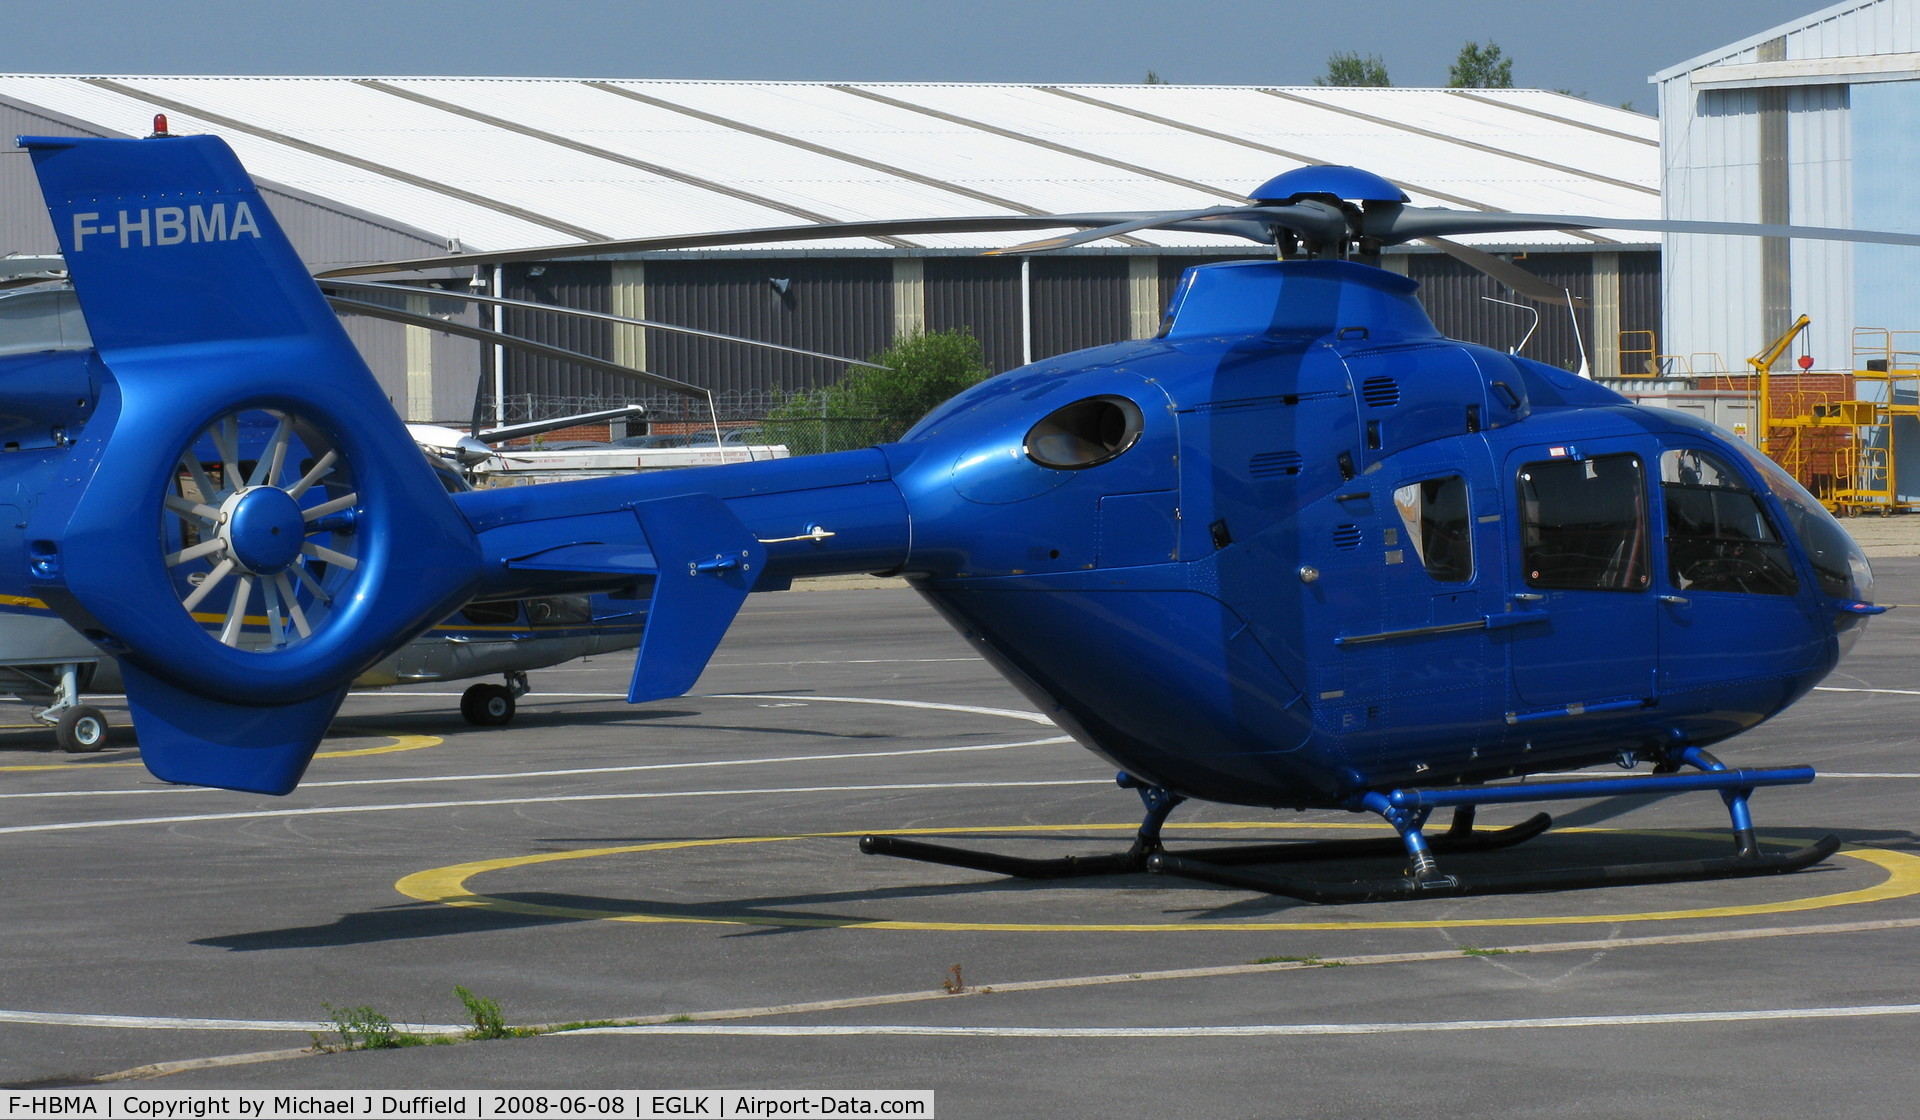 F-HBMA, 2005 Eurocopter EC-135T-2 C/N 0432, French EC135 helicopter seen visiting Premiair at Blackbushe on 8th June 2008; aircraft crashed and destroyed on 2nd January 2009 in France